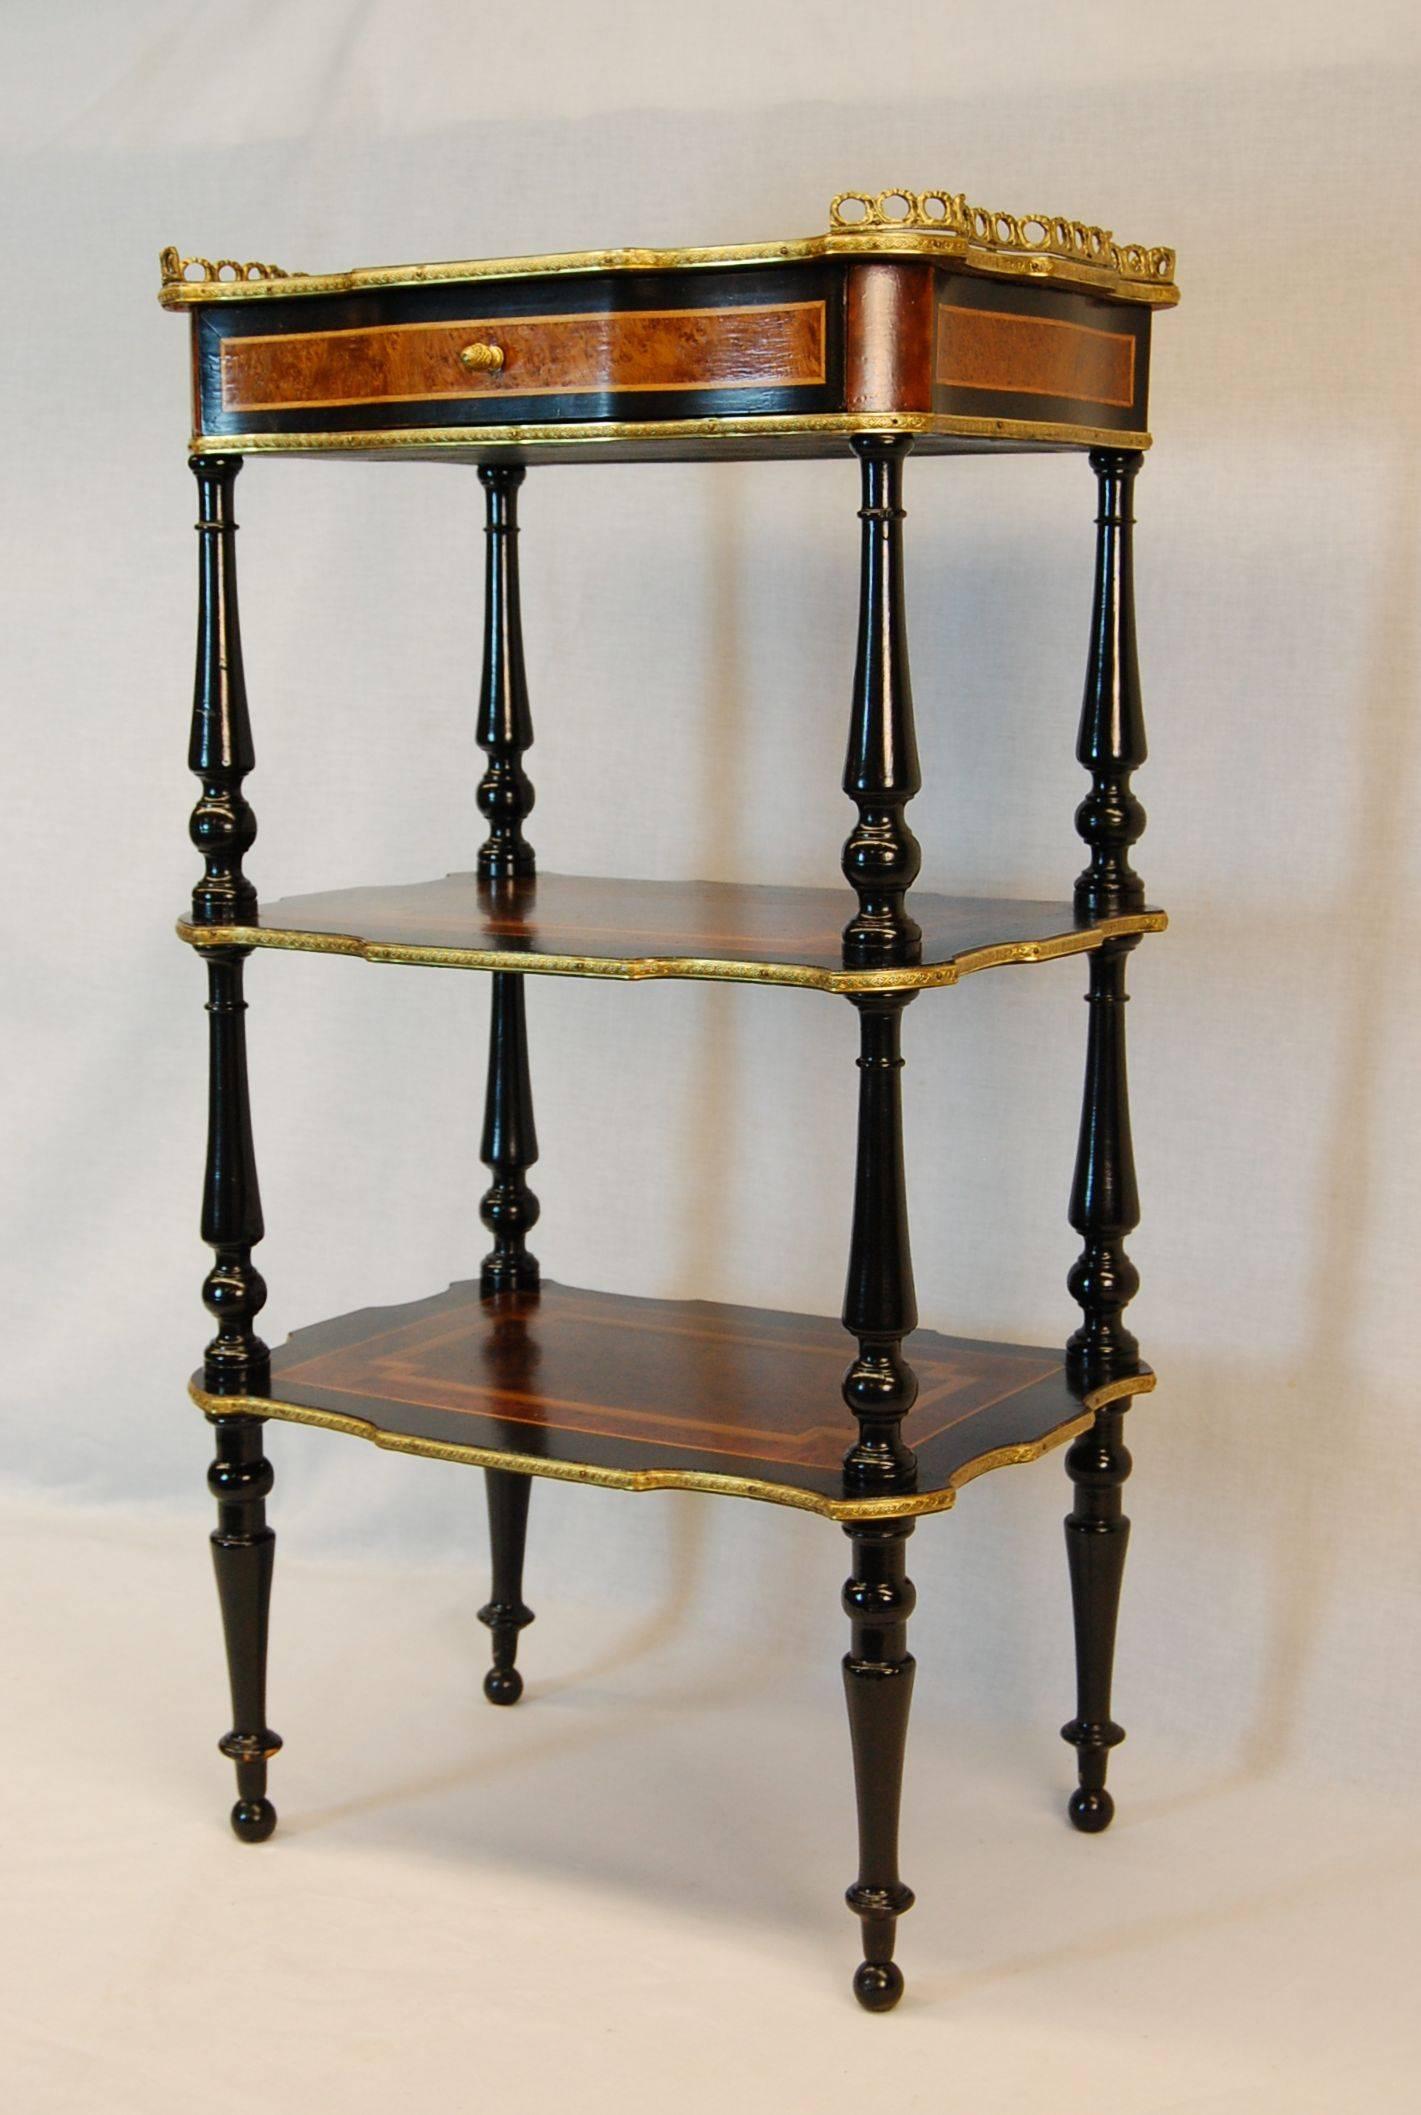 Inlay French Neoclassical Revival Three-Tier Side Table, circa 1870 For Sale